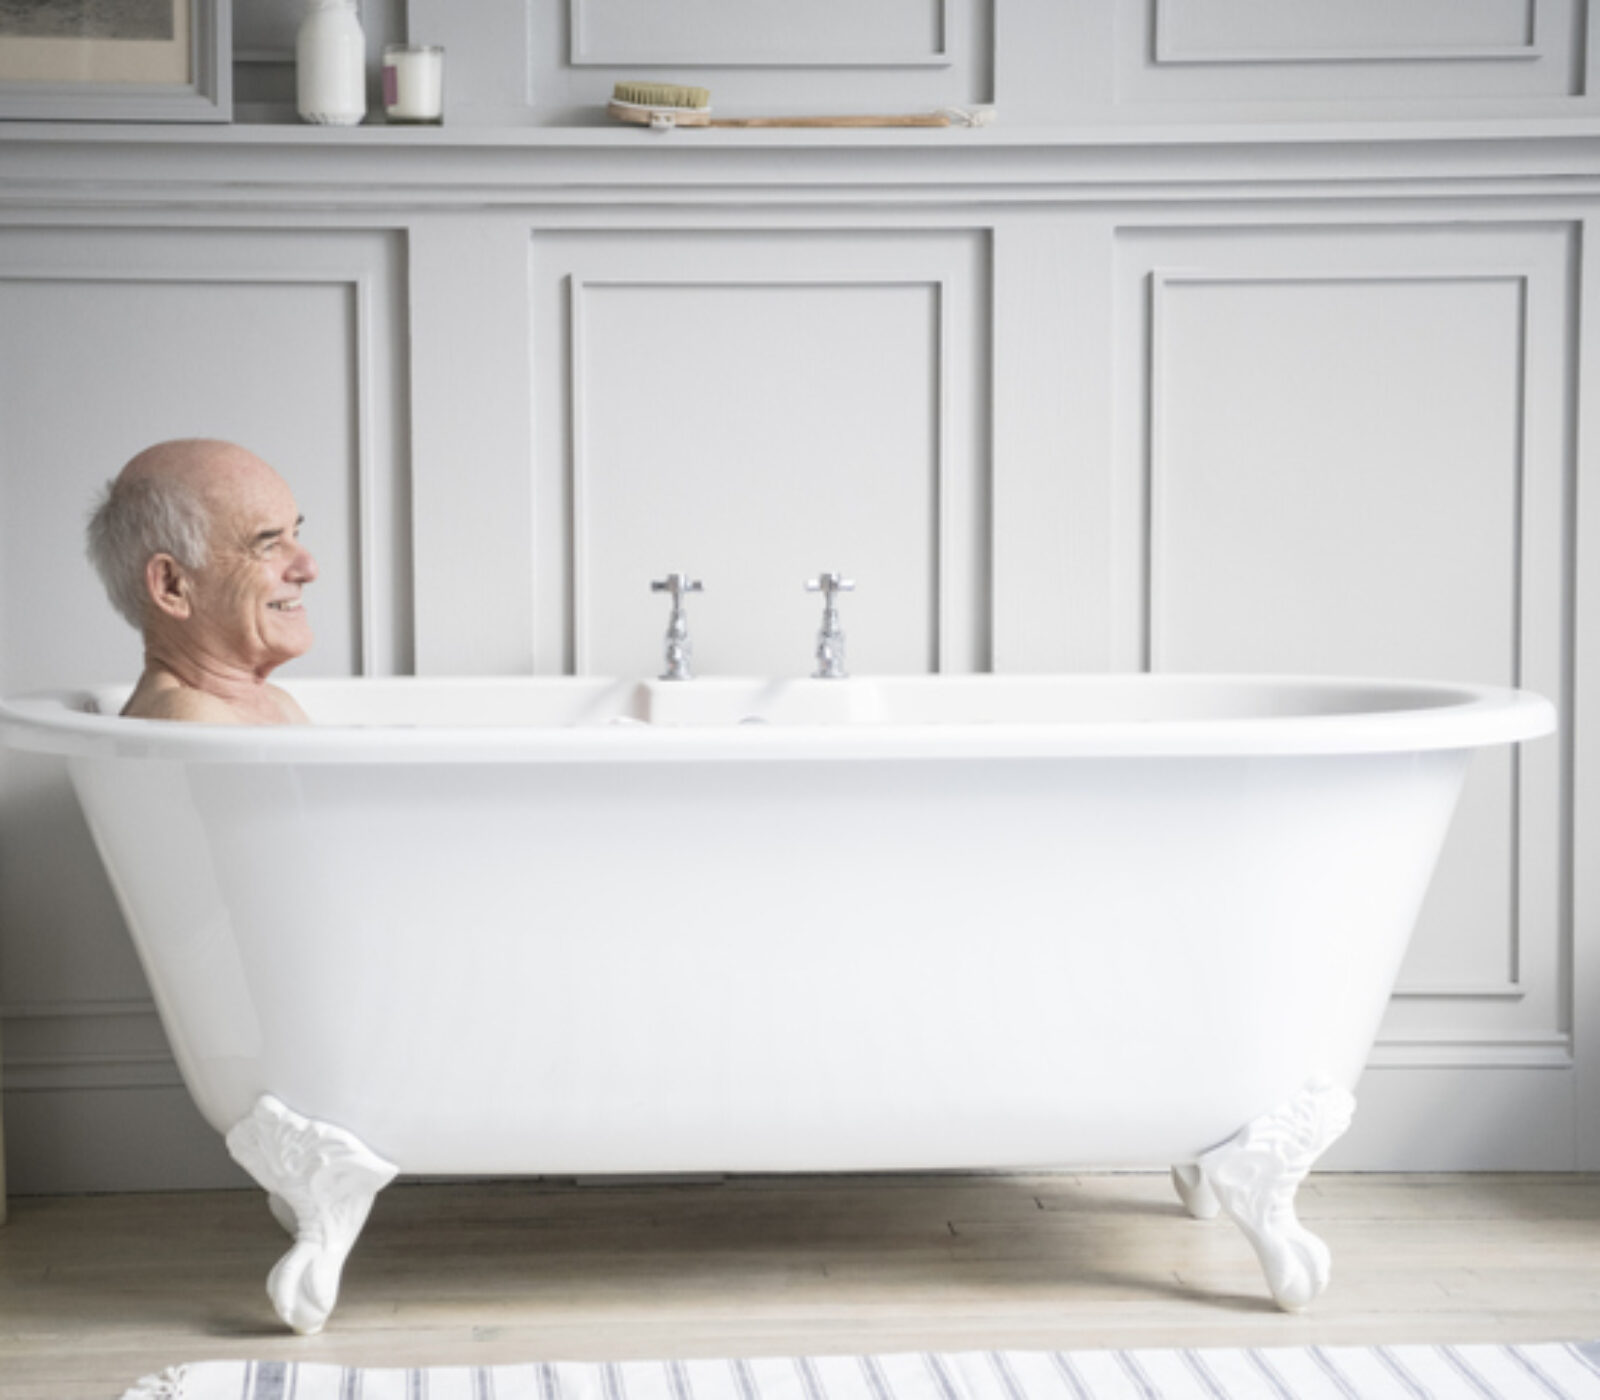 5 Useful Tips To Improve Bath Time for Aging Loved Ones | ALL